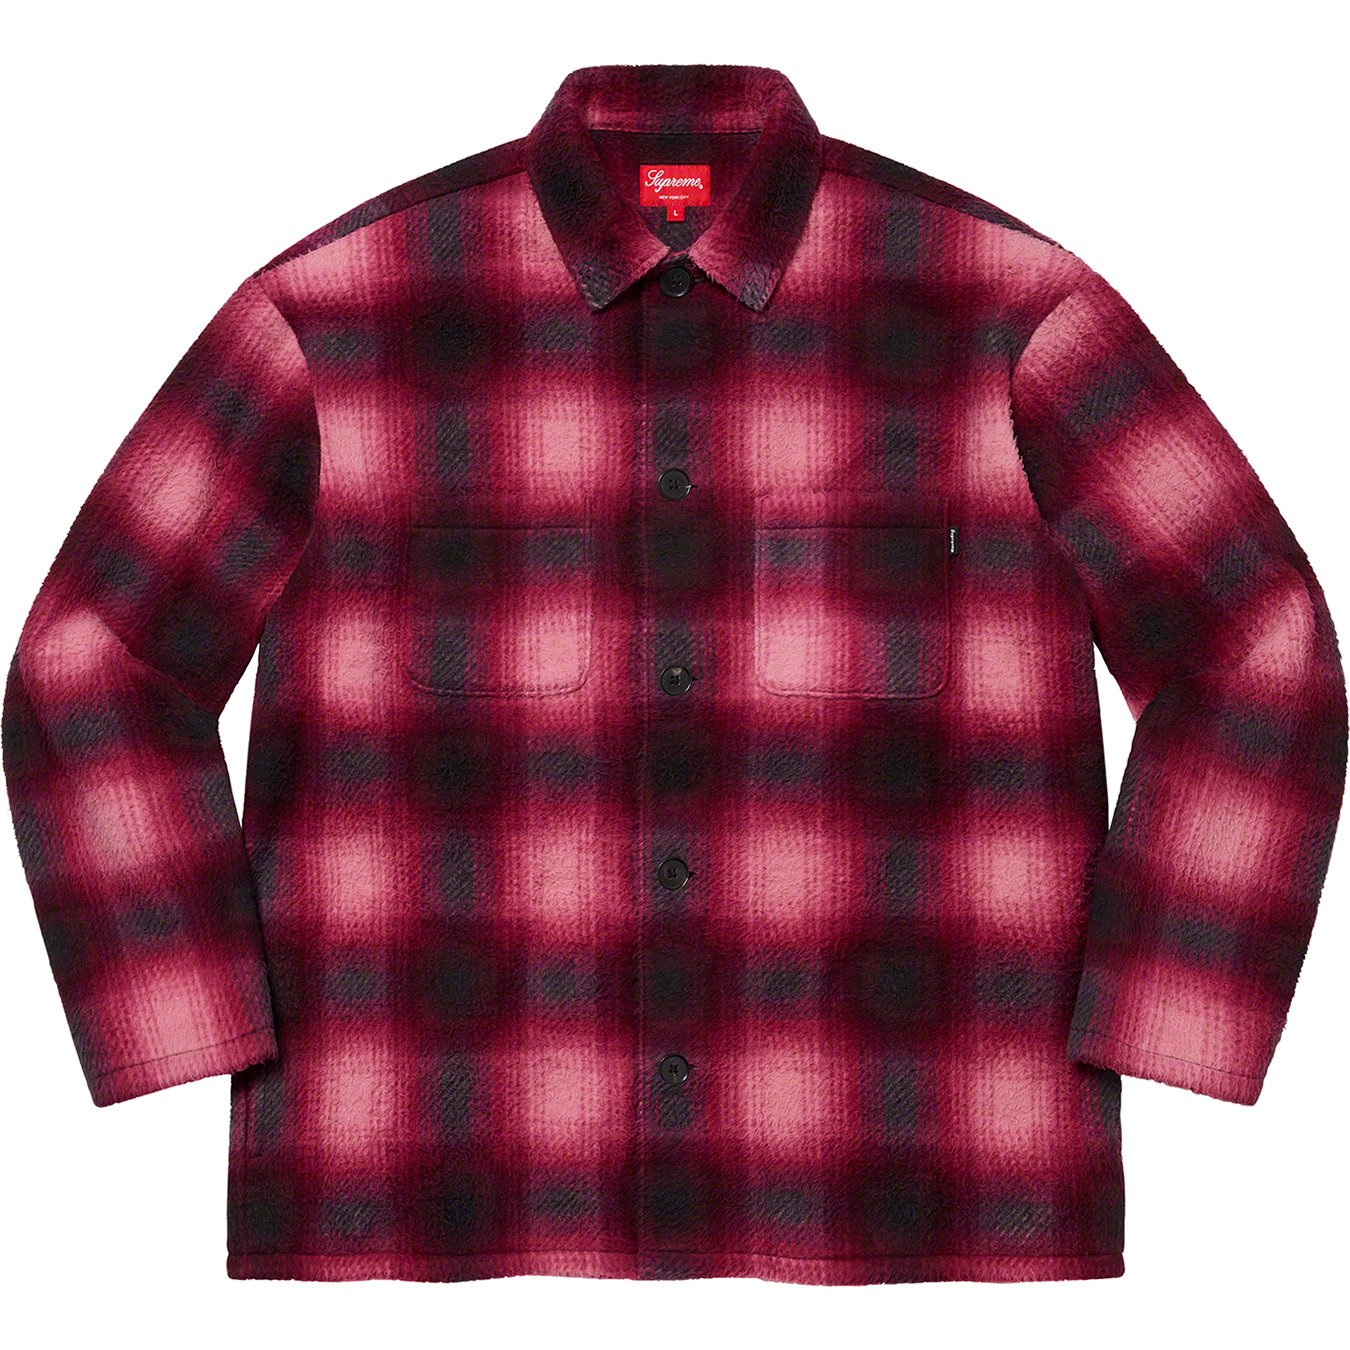 Sup Shadow Plaid Flannel Zip Up Shirt